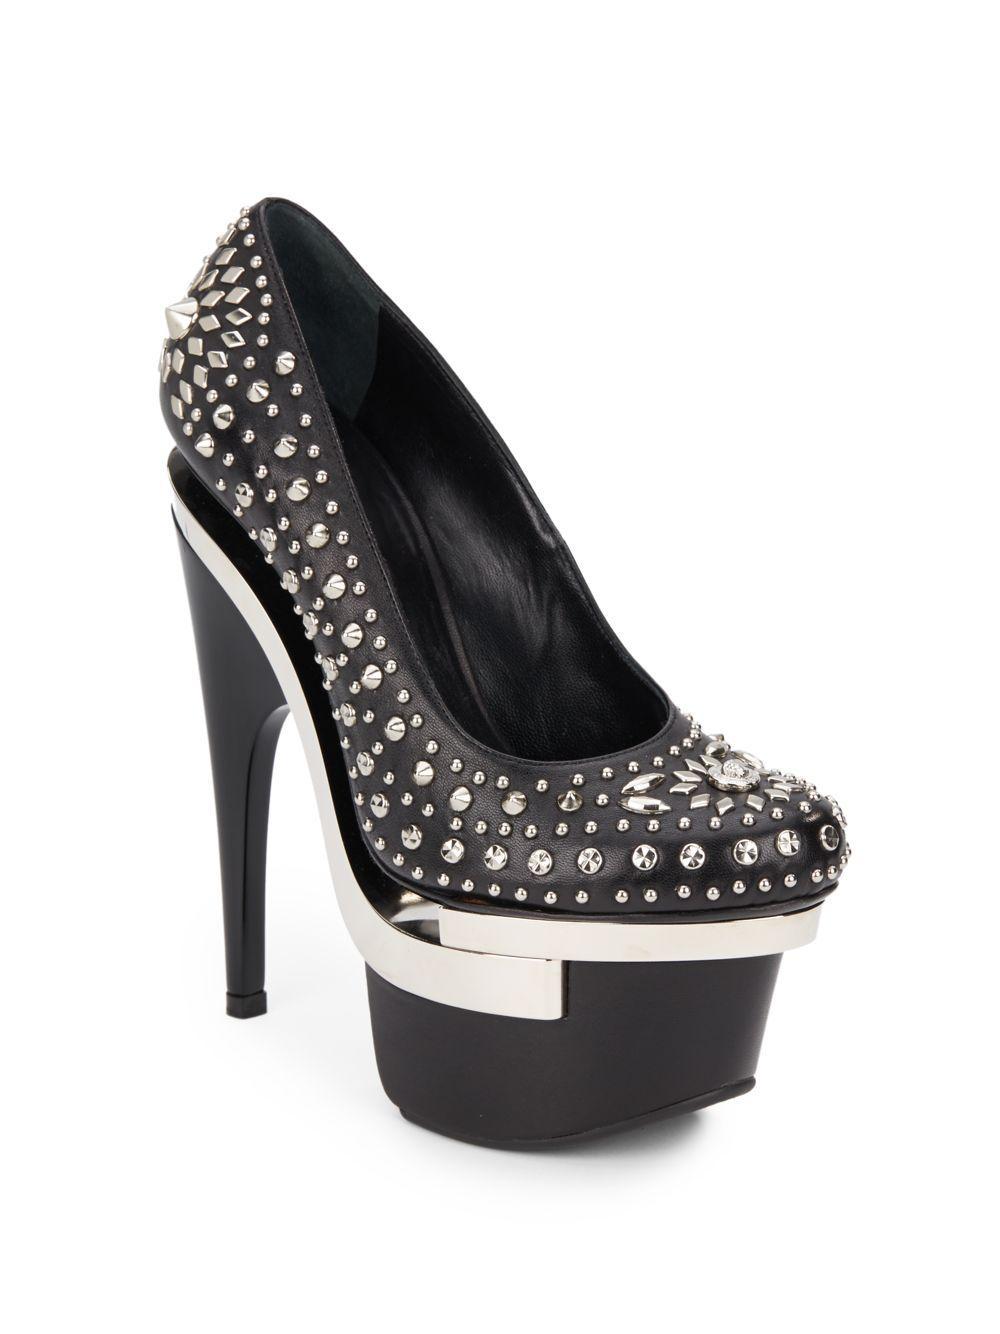 New Versace Triple Platform Leather Shoes Pumps
Designer size - 38 B ( US 8 B )
Colors - Silver & Black
100% Leather, Silver Tone Metal Studs, Leather Lining, Leather Sole
Heel Height Approx. - 6.5 inches, Platform - 2.5 inches.
Made in Italy
New